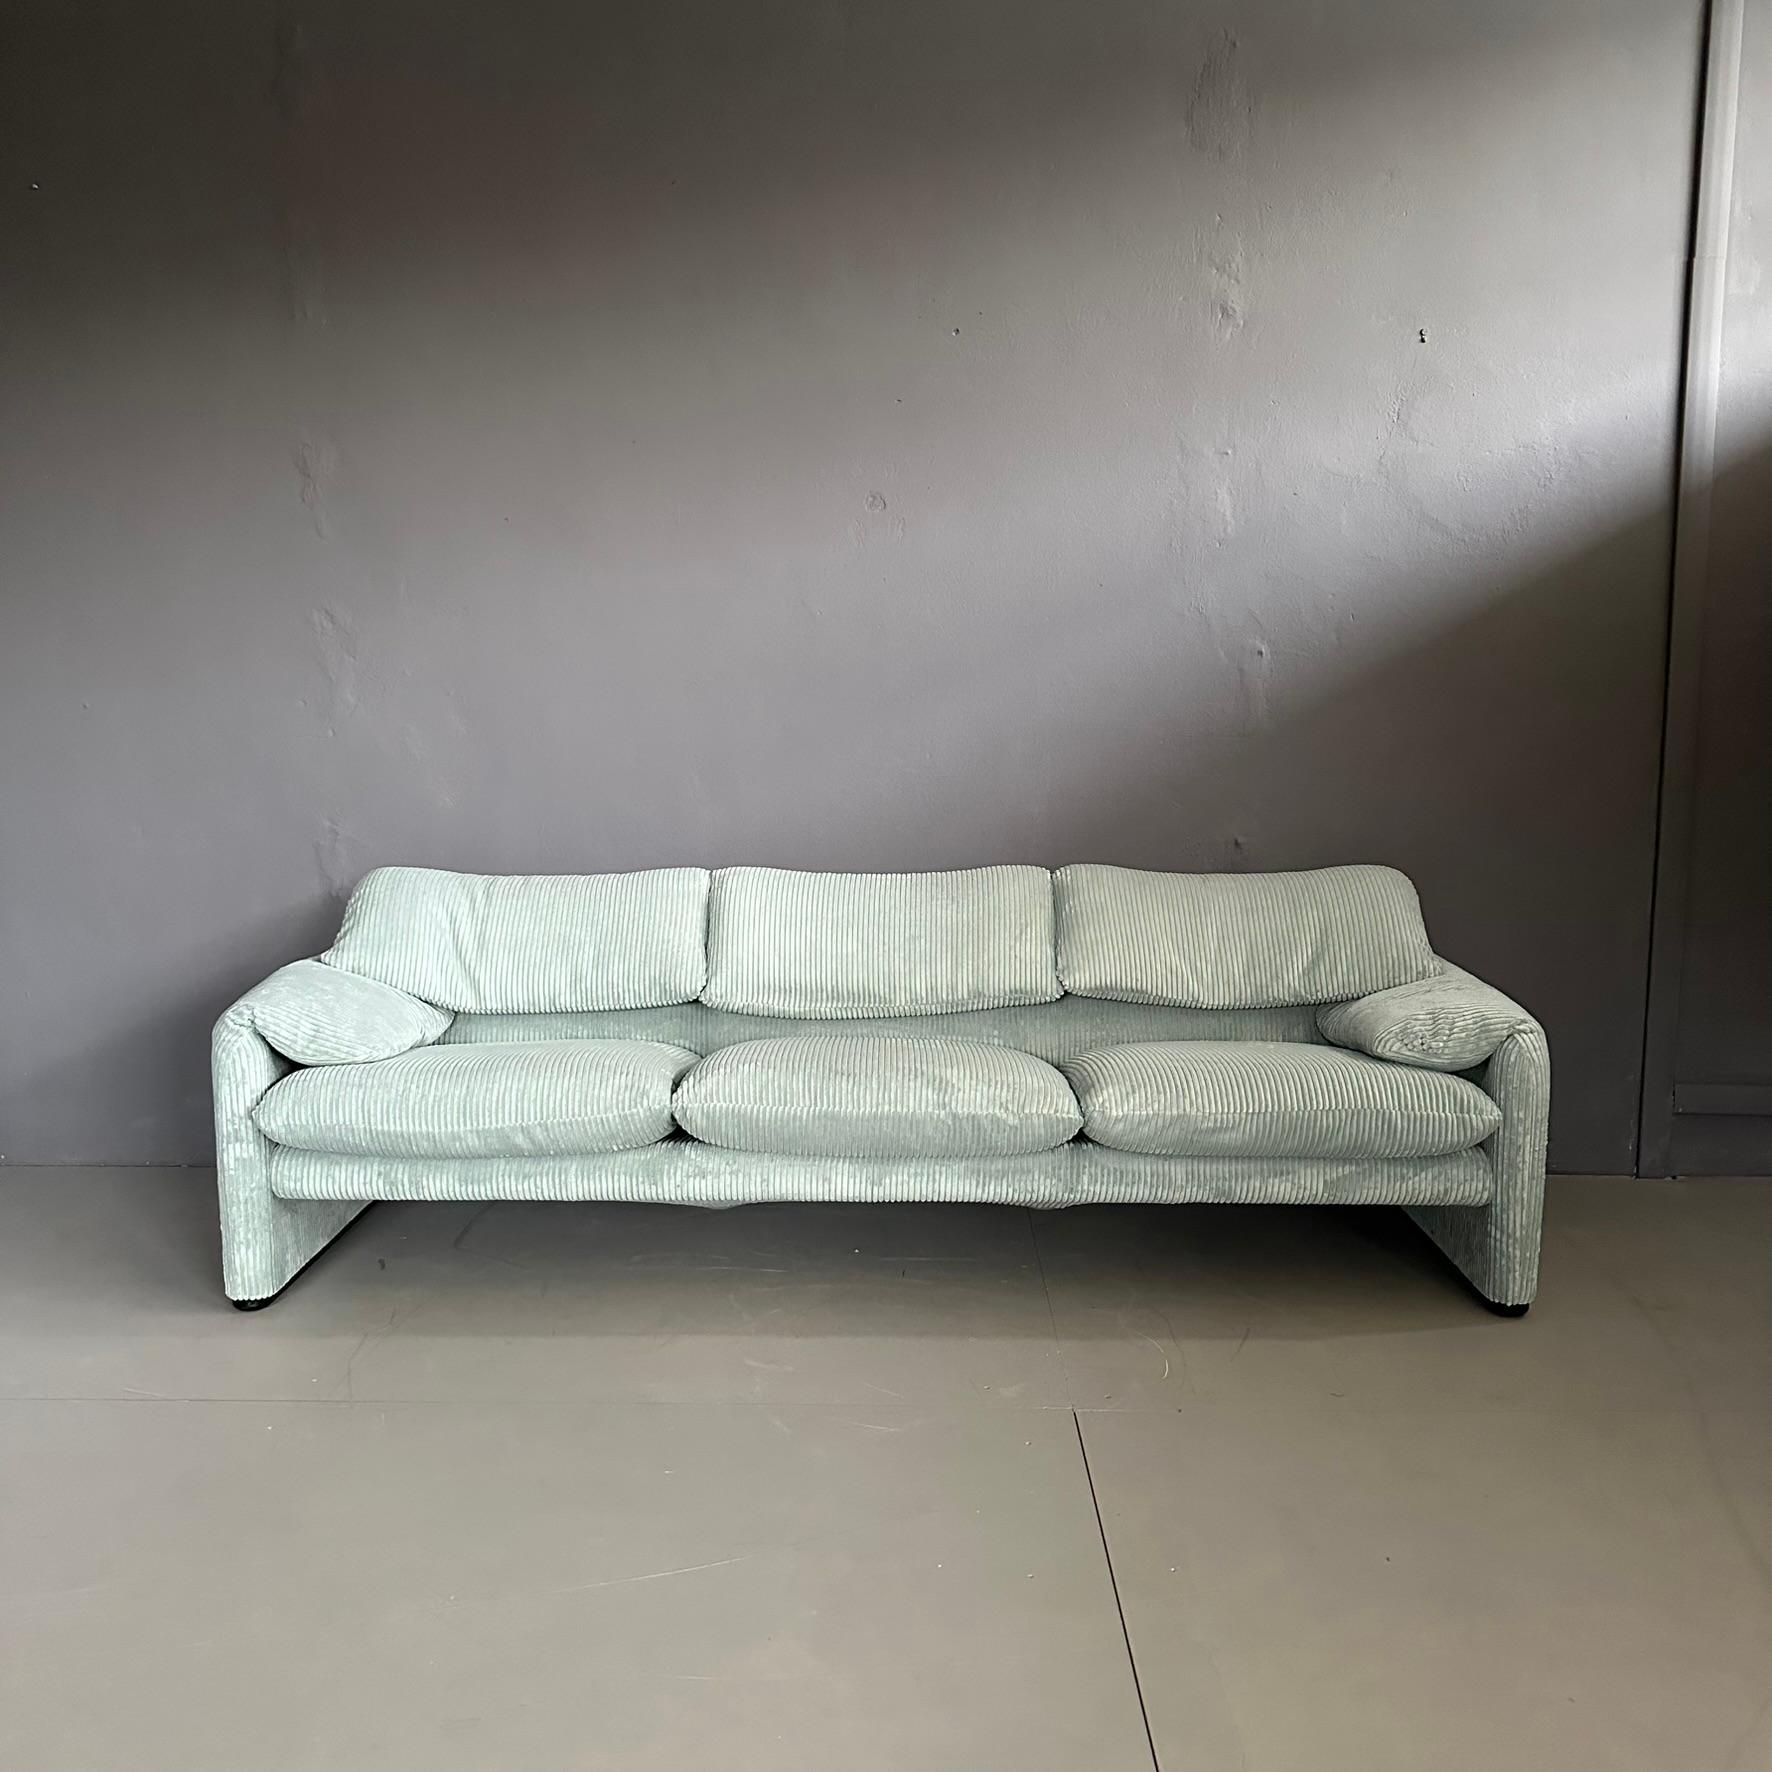 Pair of Maralunga sofas design by Vico Magistretti for Cassina 2seater - 3seater In Good Condition For Sale In Milan, IT